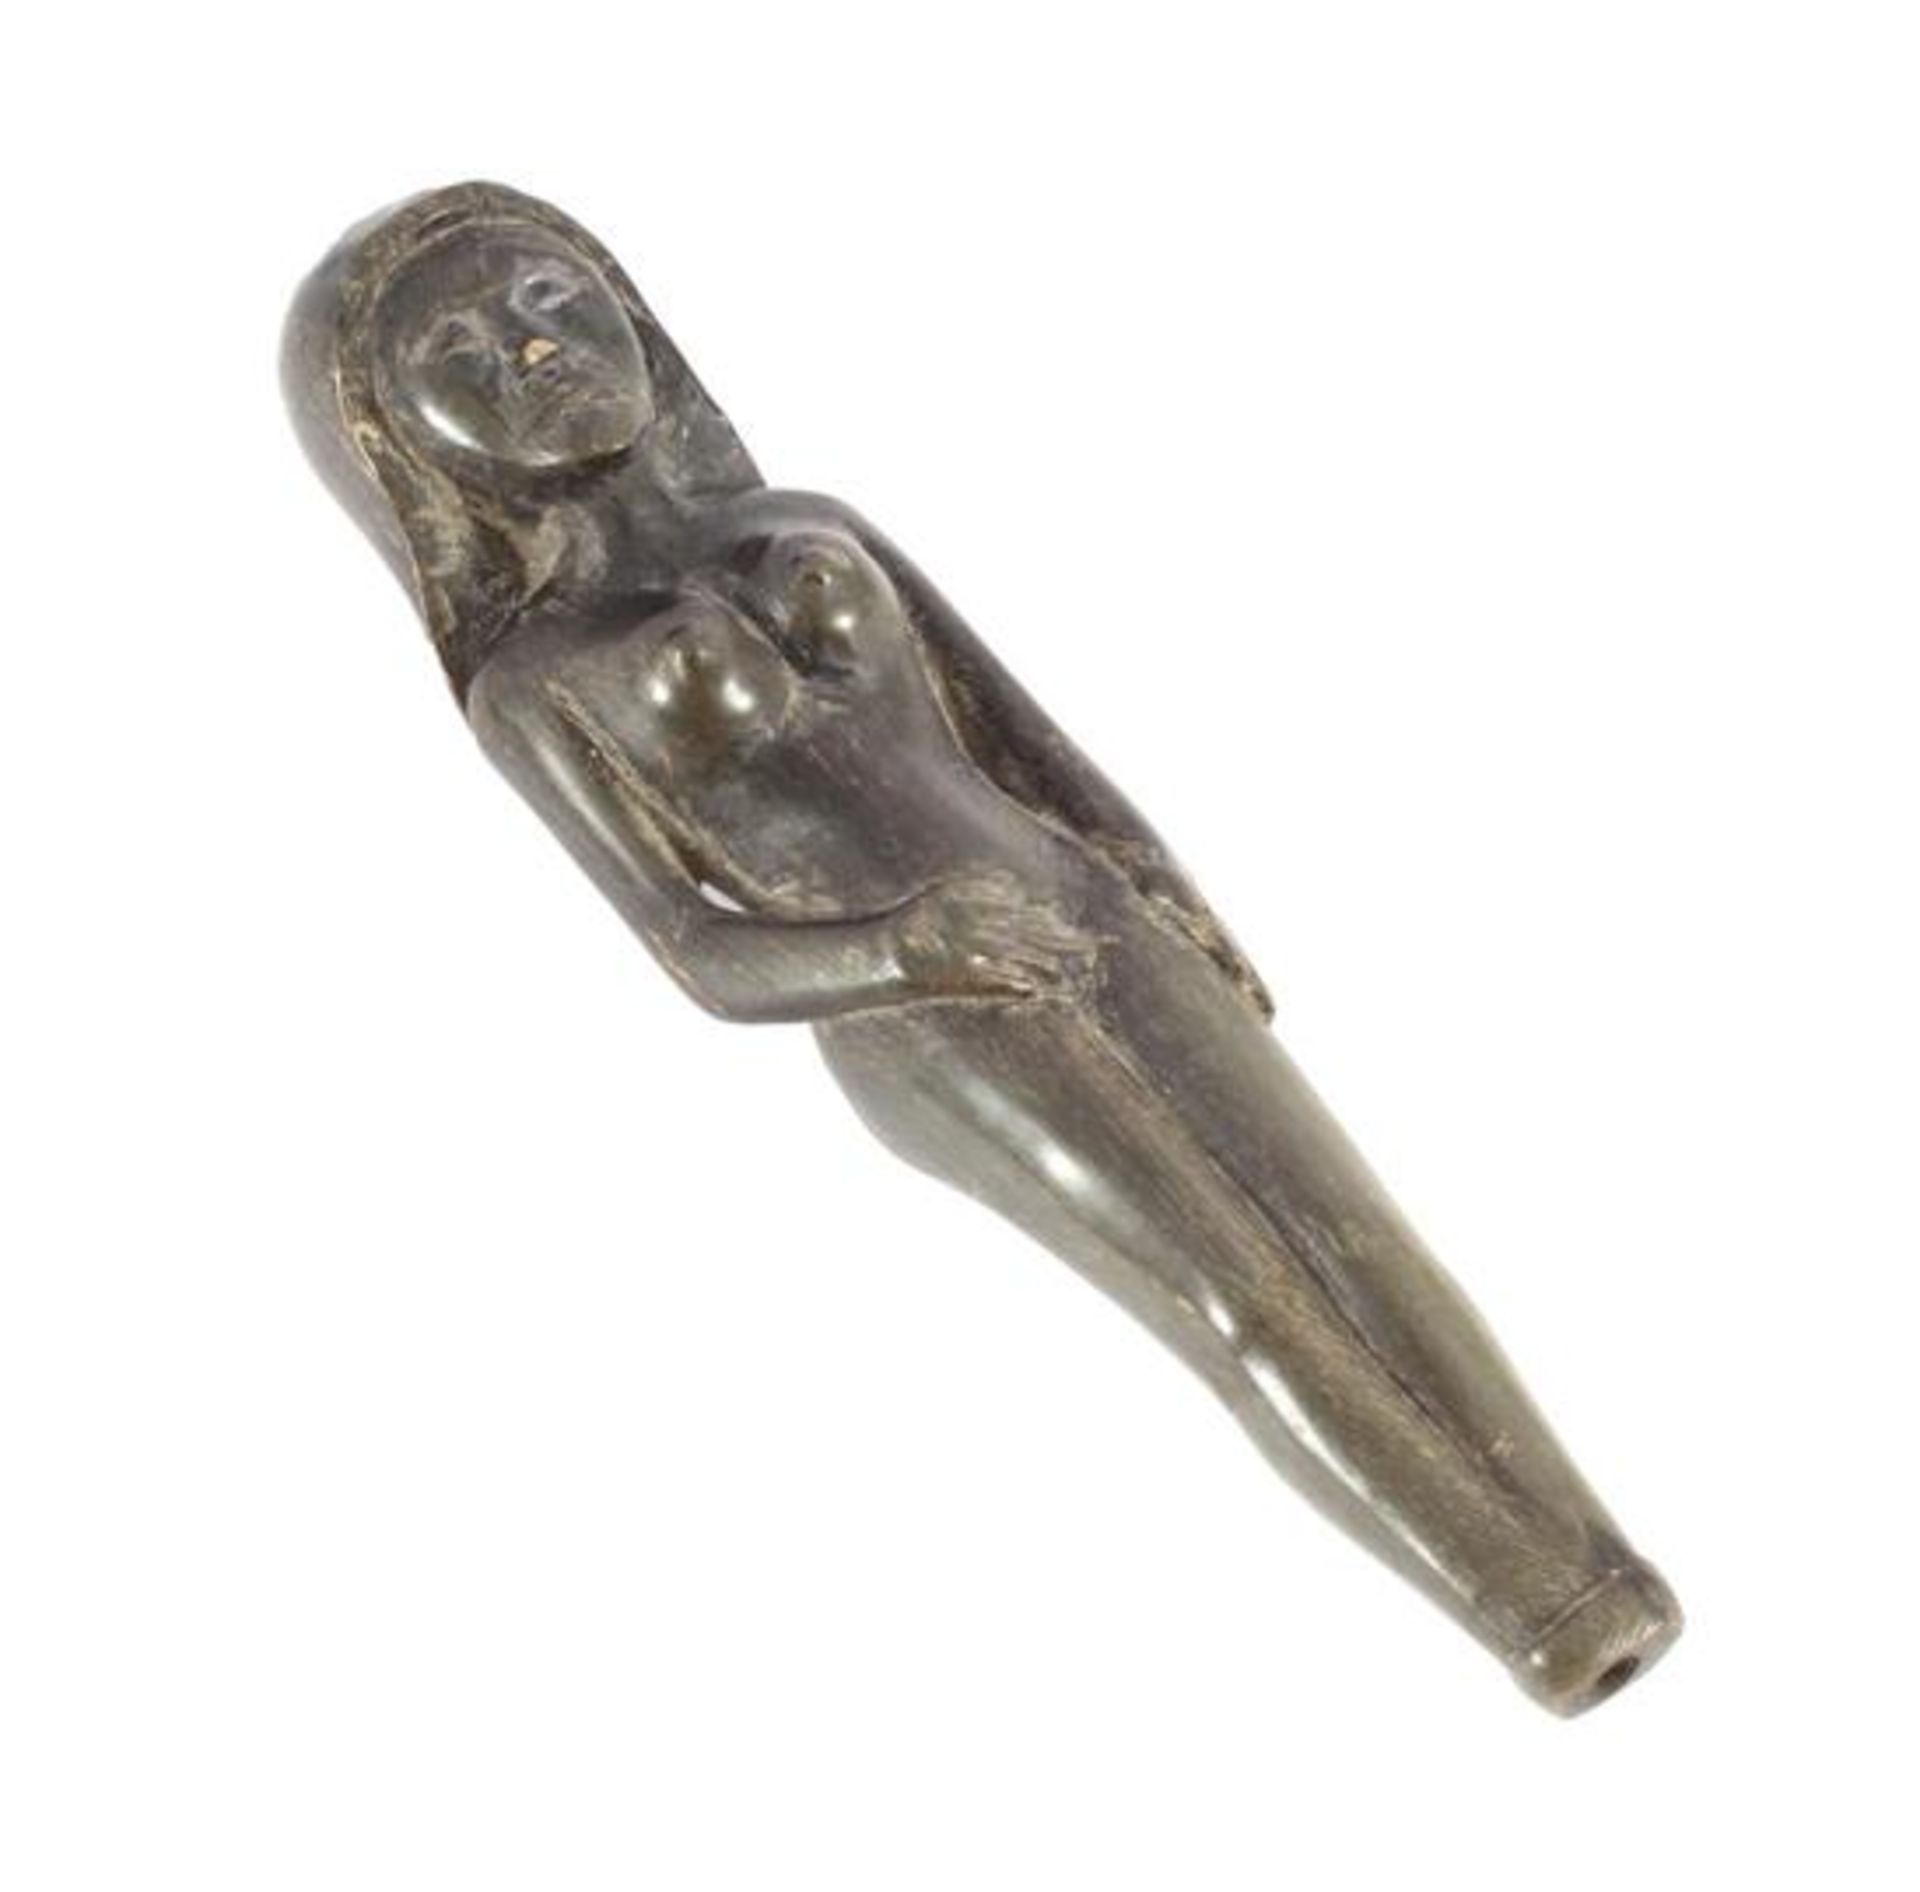 Oriental opium pipe made of horn, in the shape of a woman 11 cm long